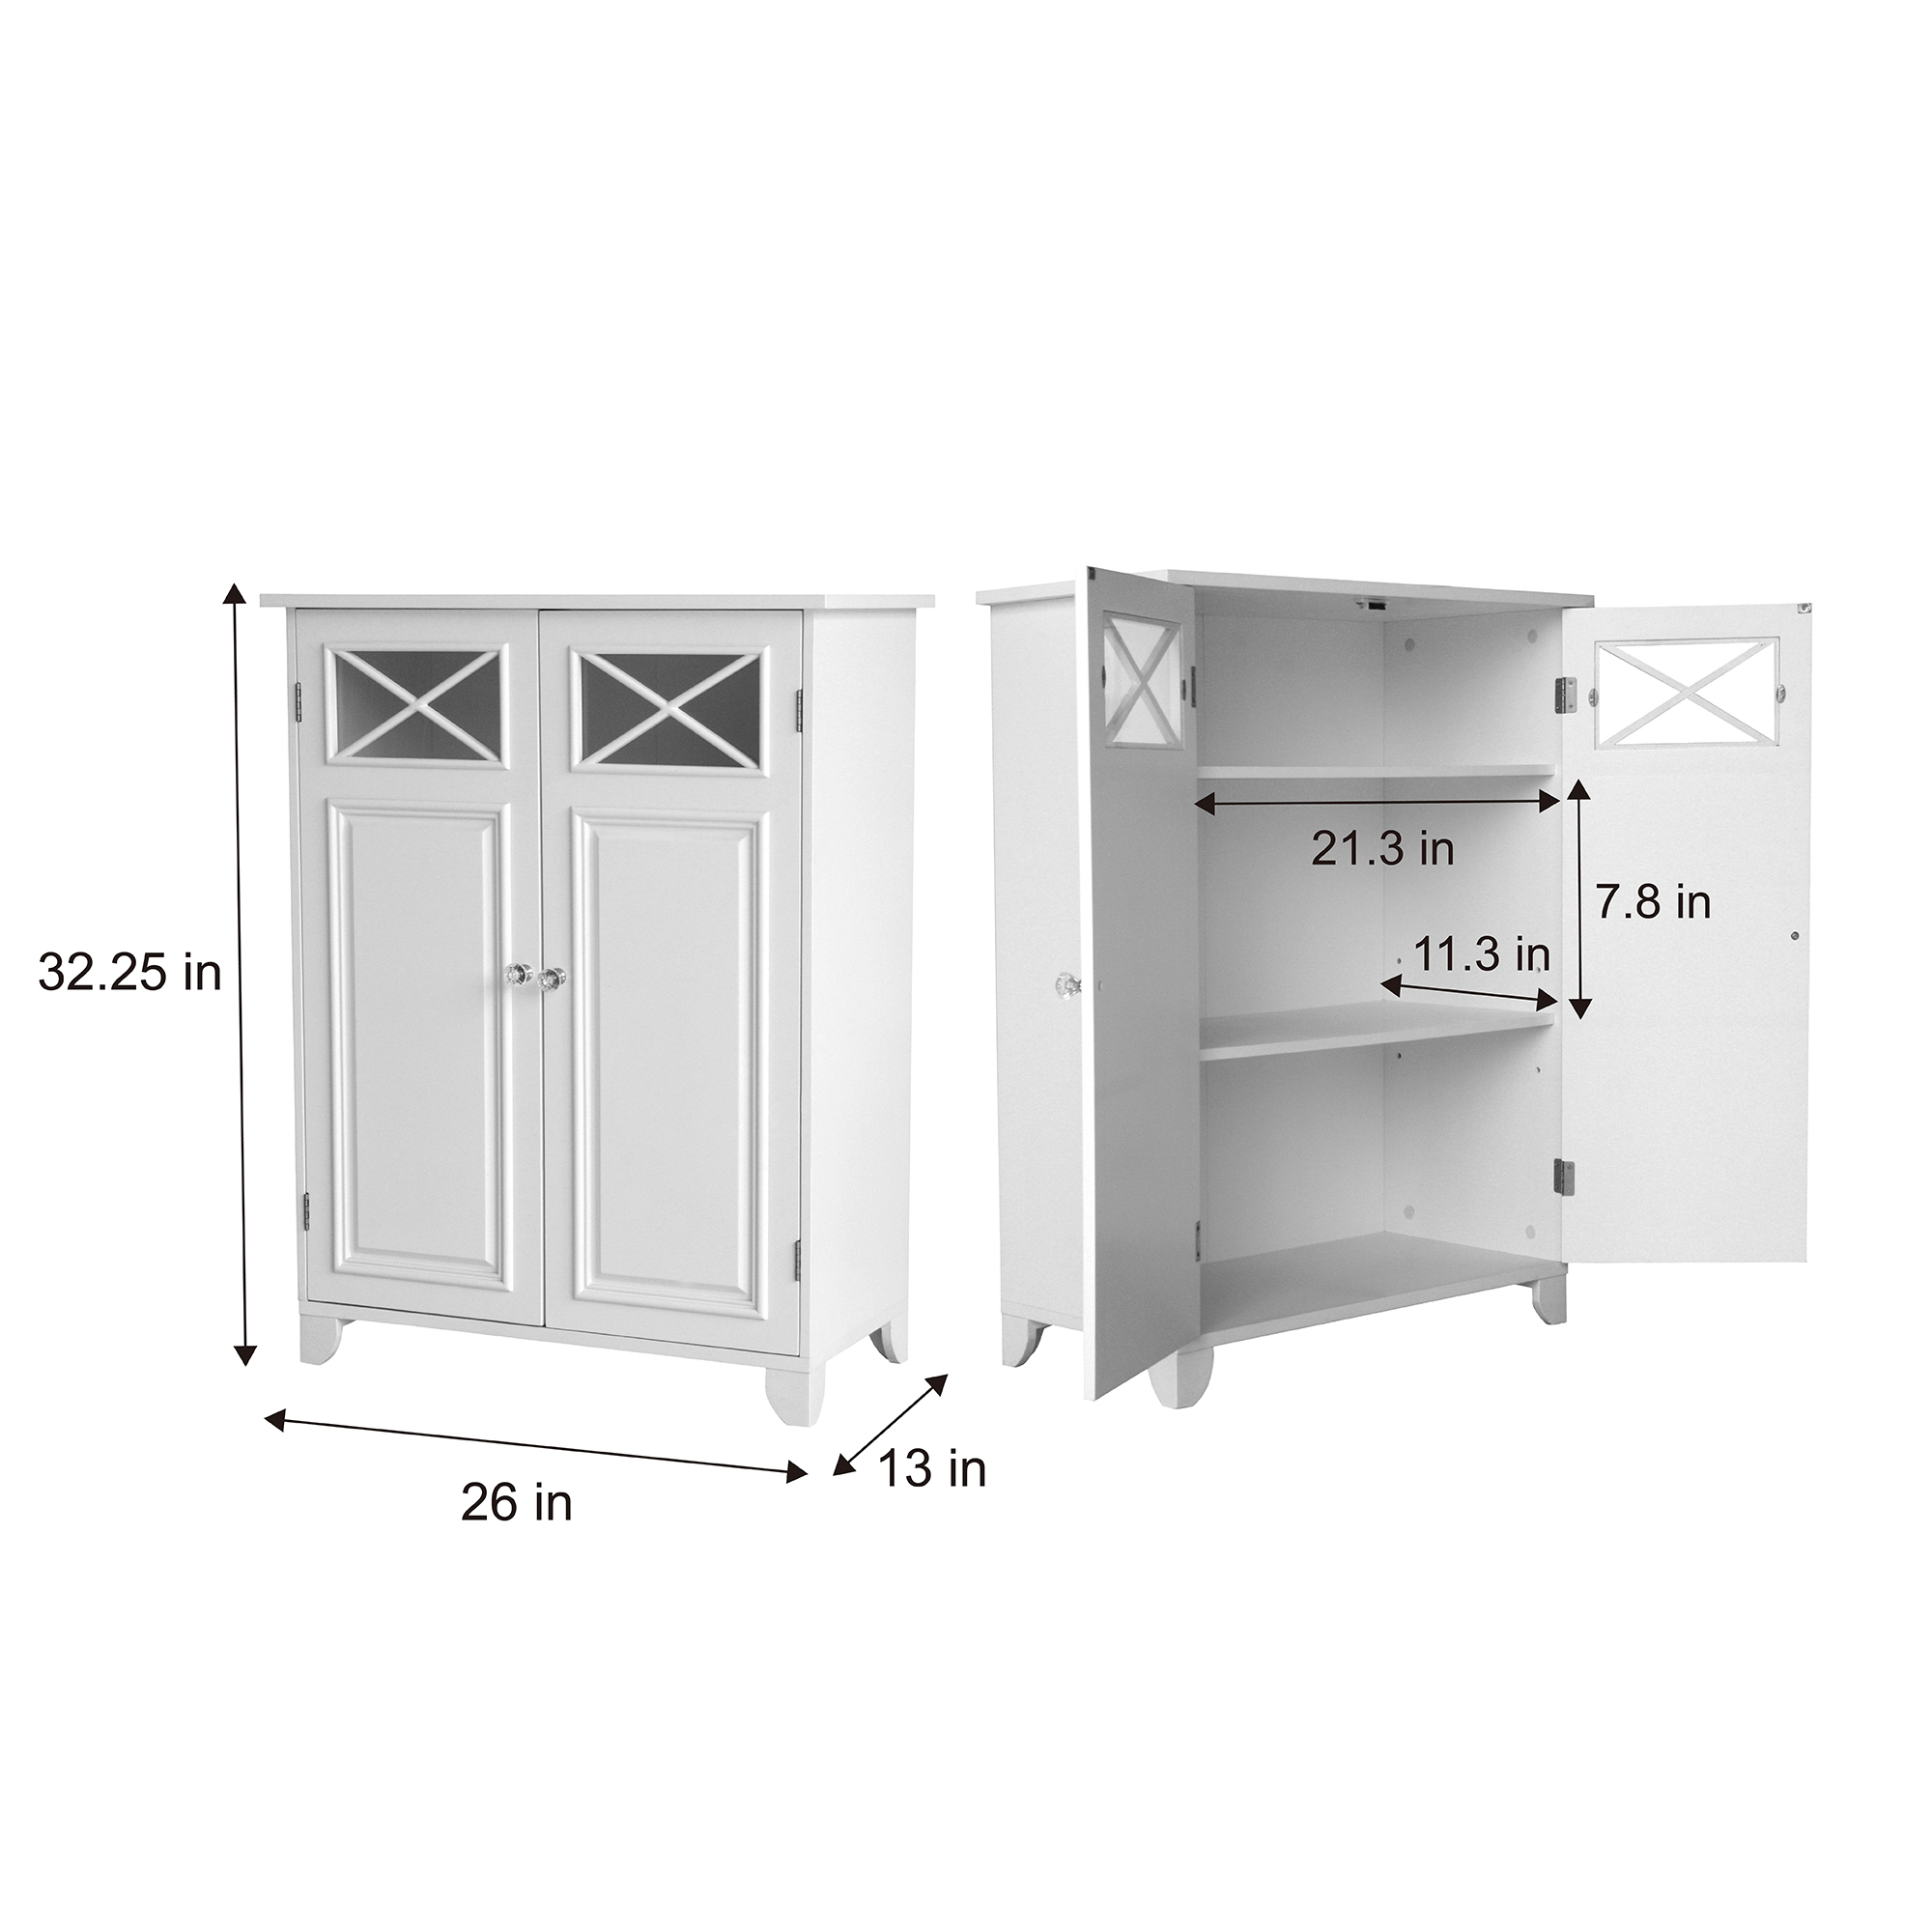 Teamson Home Dawson Wooden Floor Cabinet with Cross Molding and 2 Doors, White - image 5 of 9